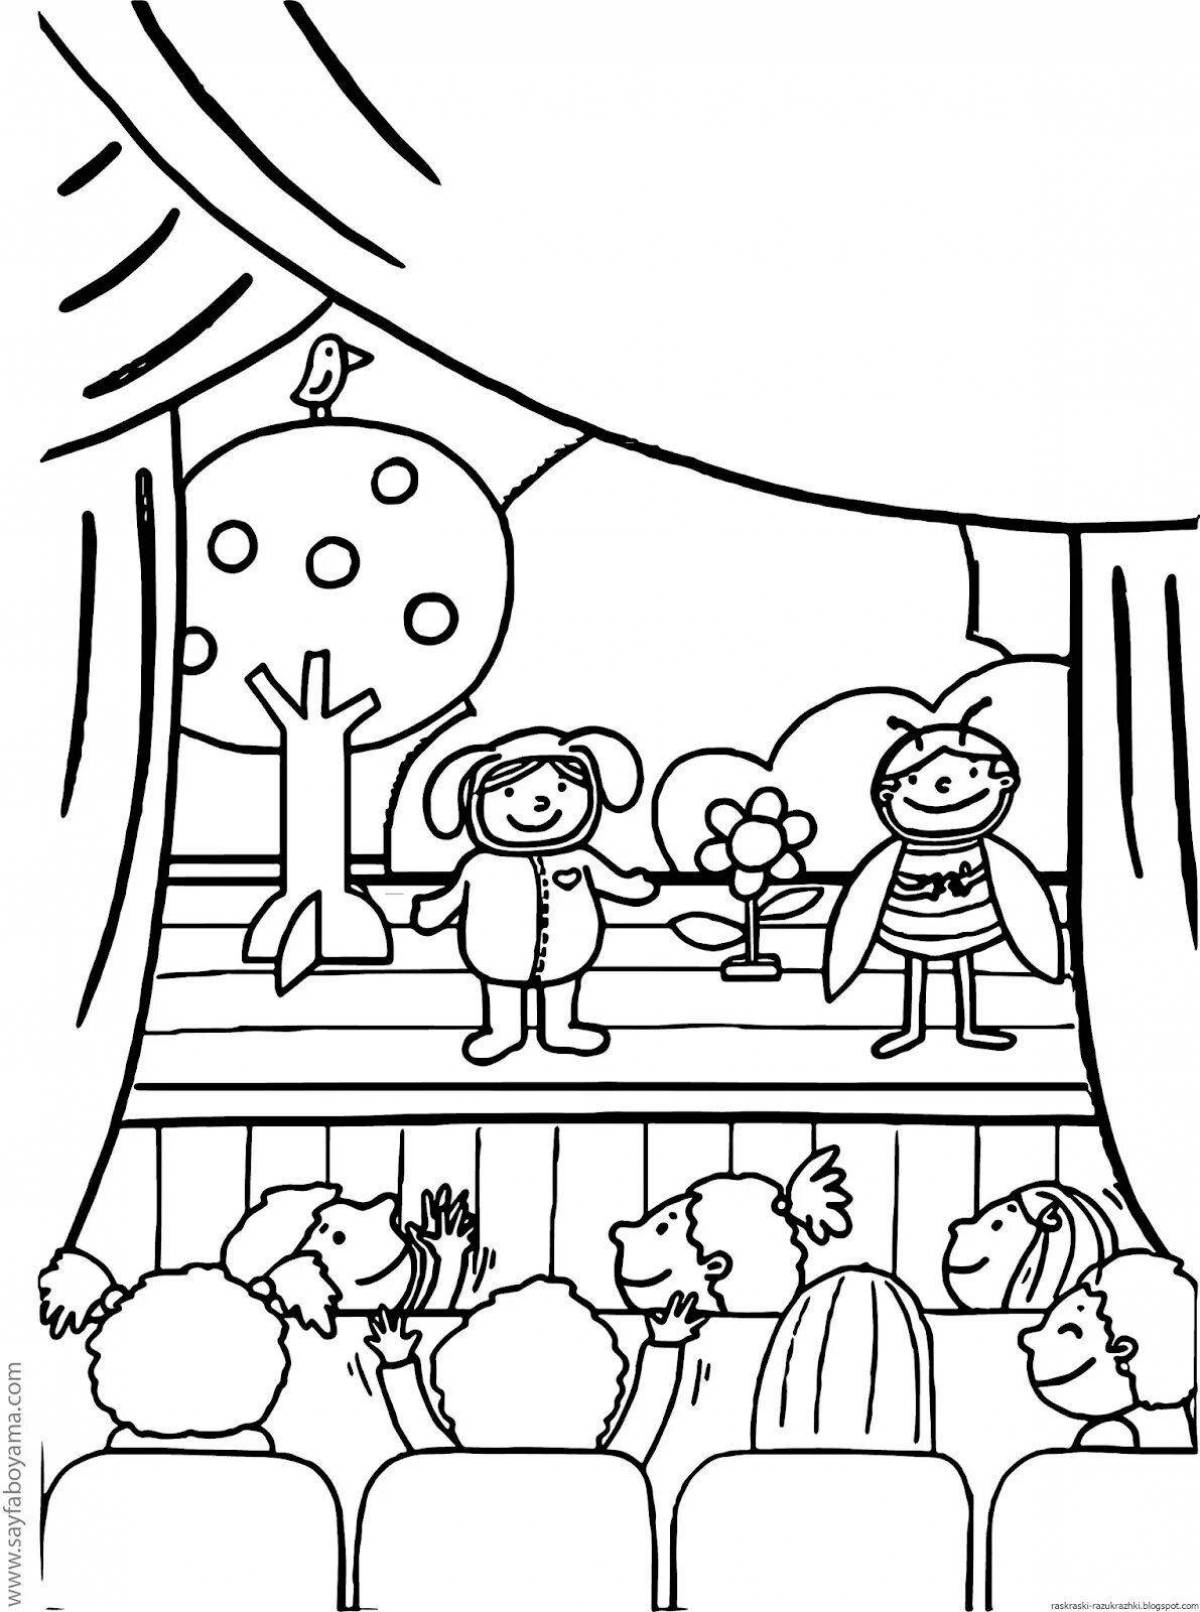 Adorable theater scene coloring book for kids and teens